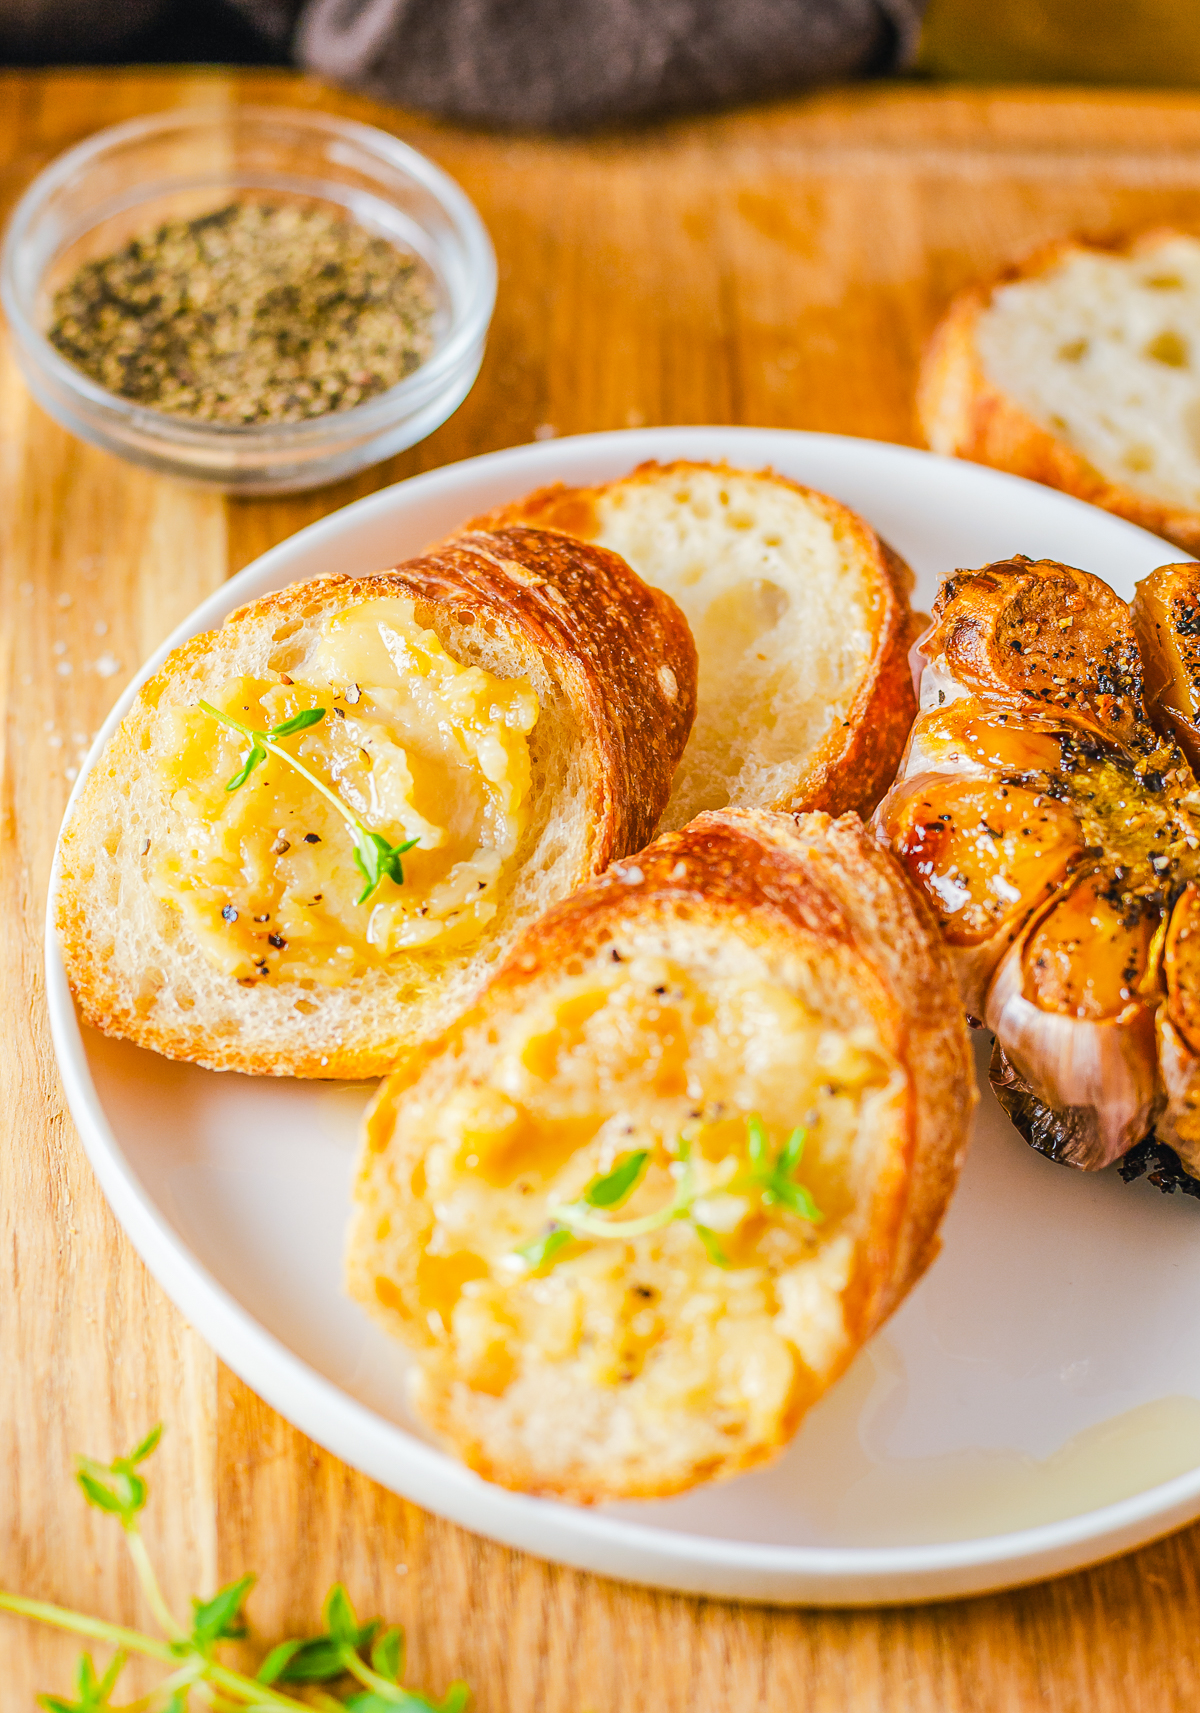 Roast Garlic Spread on slices of bread with a whole garlic on the side.